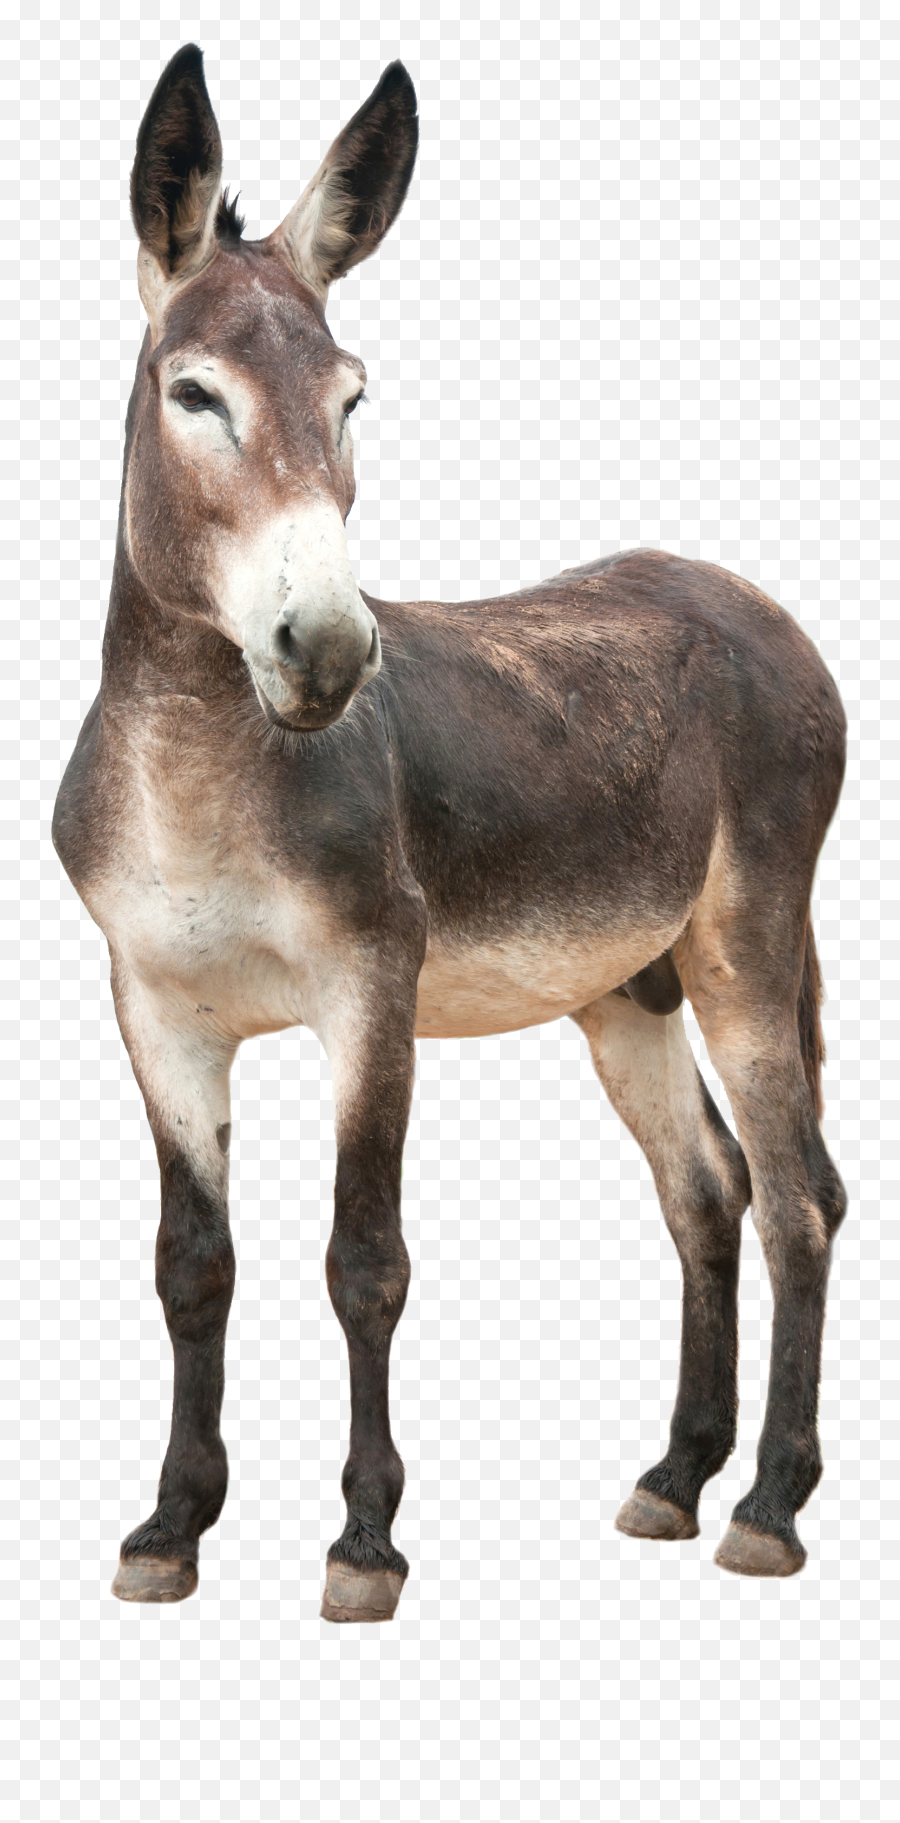 46 Donkey Png Images Are Free To Download - Donkey Png Emoji,Donkey Emoji Download